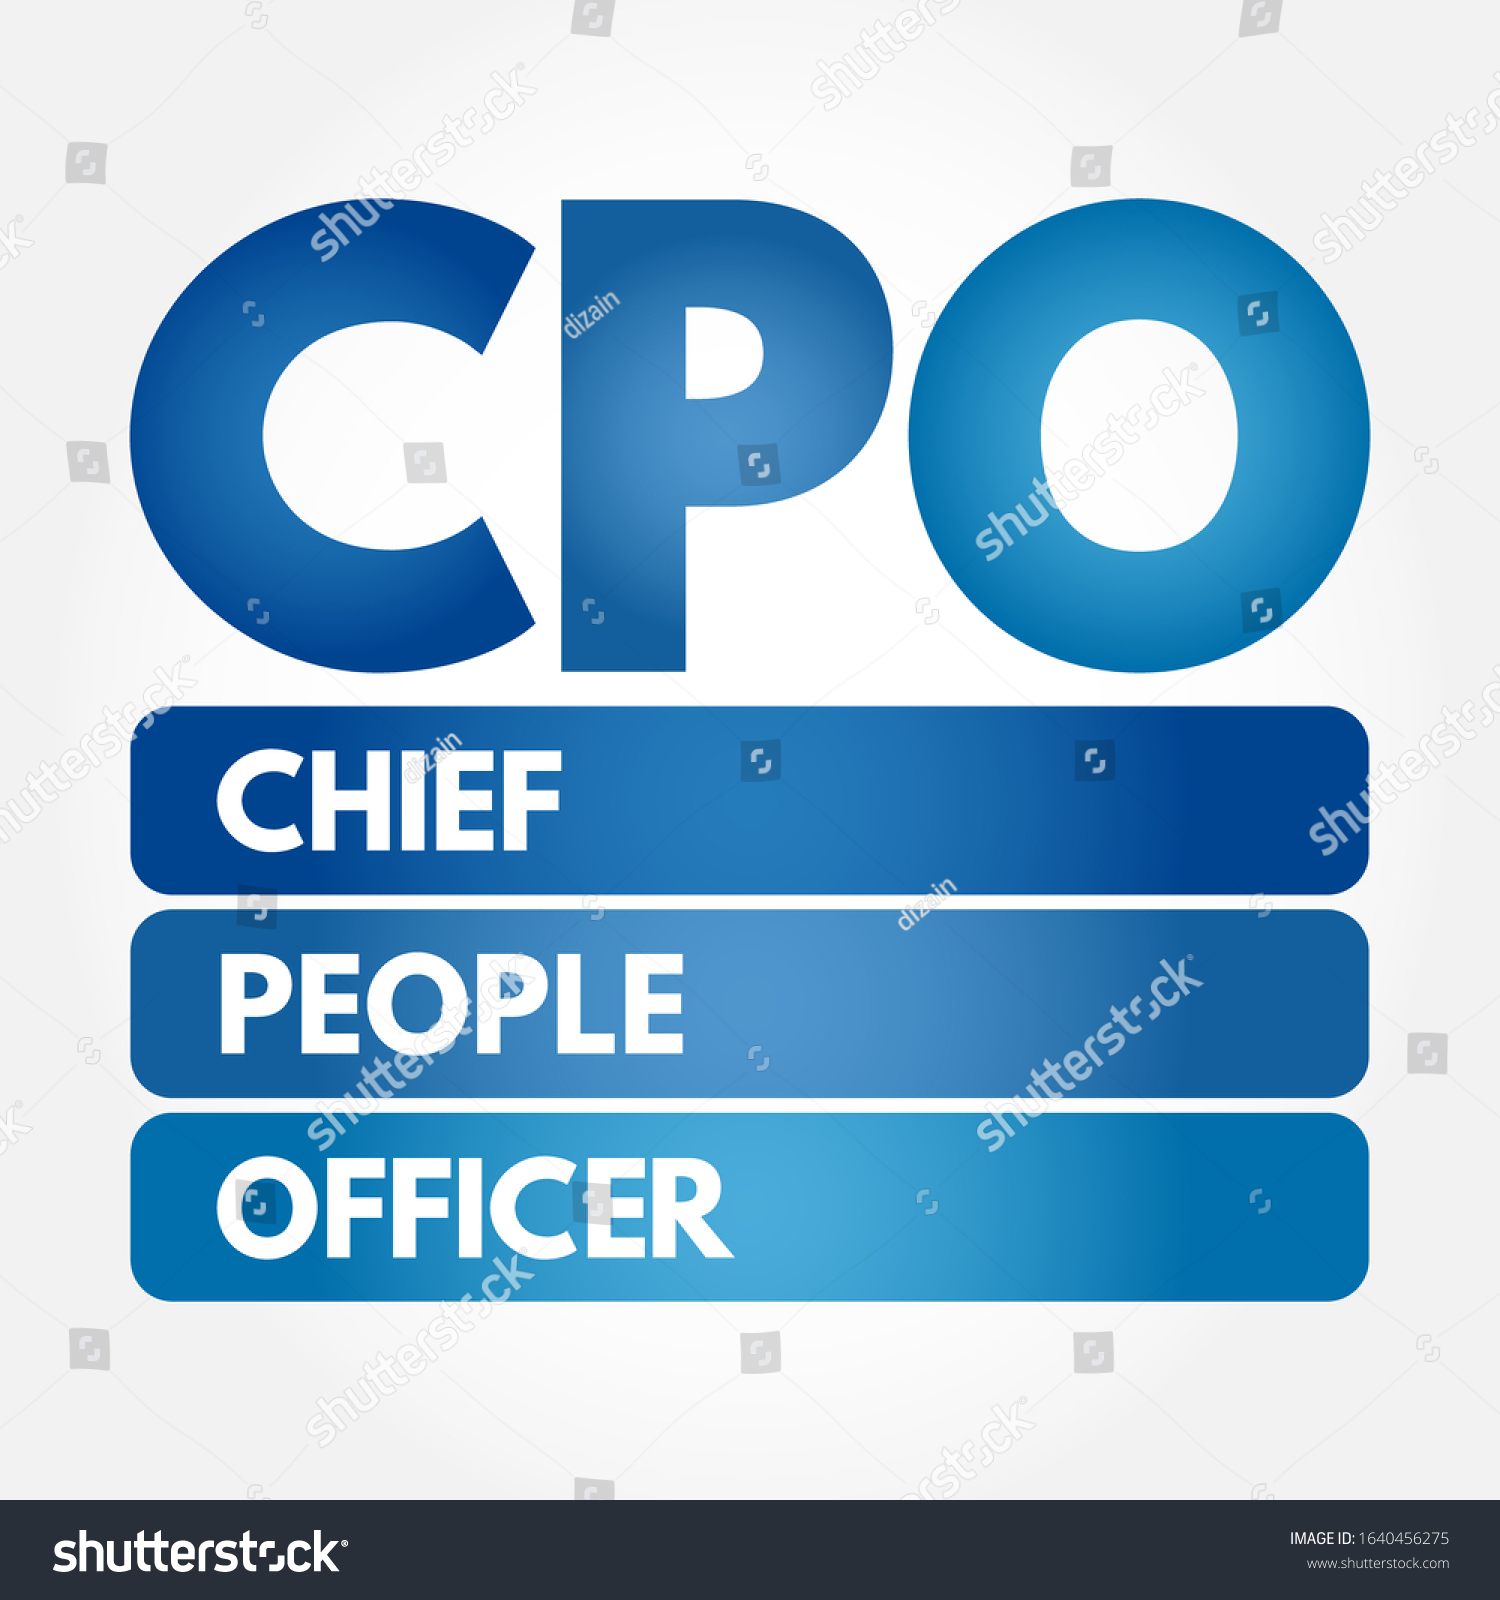 CPO Chief People Officer - corporate officer who oversees all aspects of human resource management and industrial relations policies, acronym text concept background #1640456275